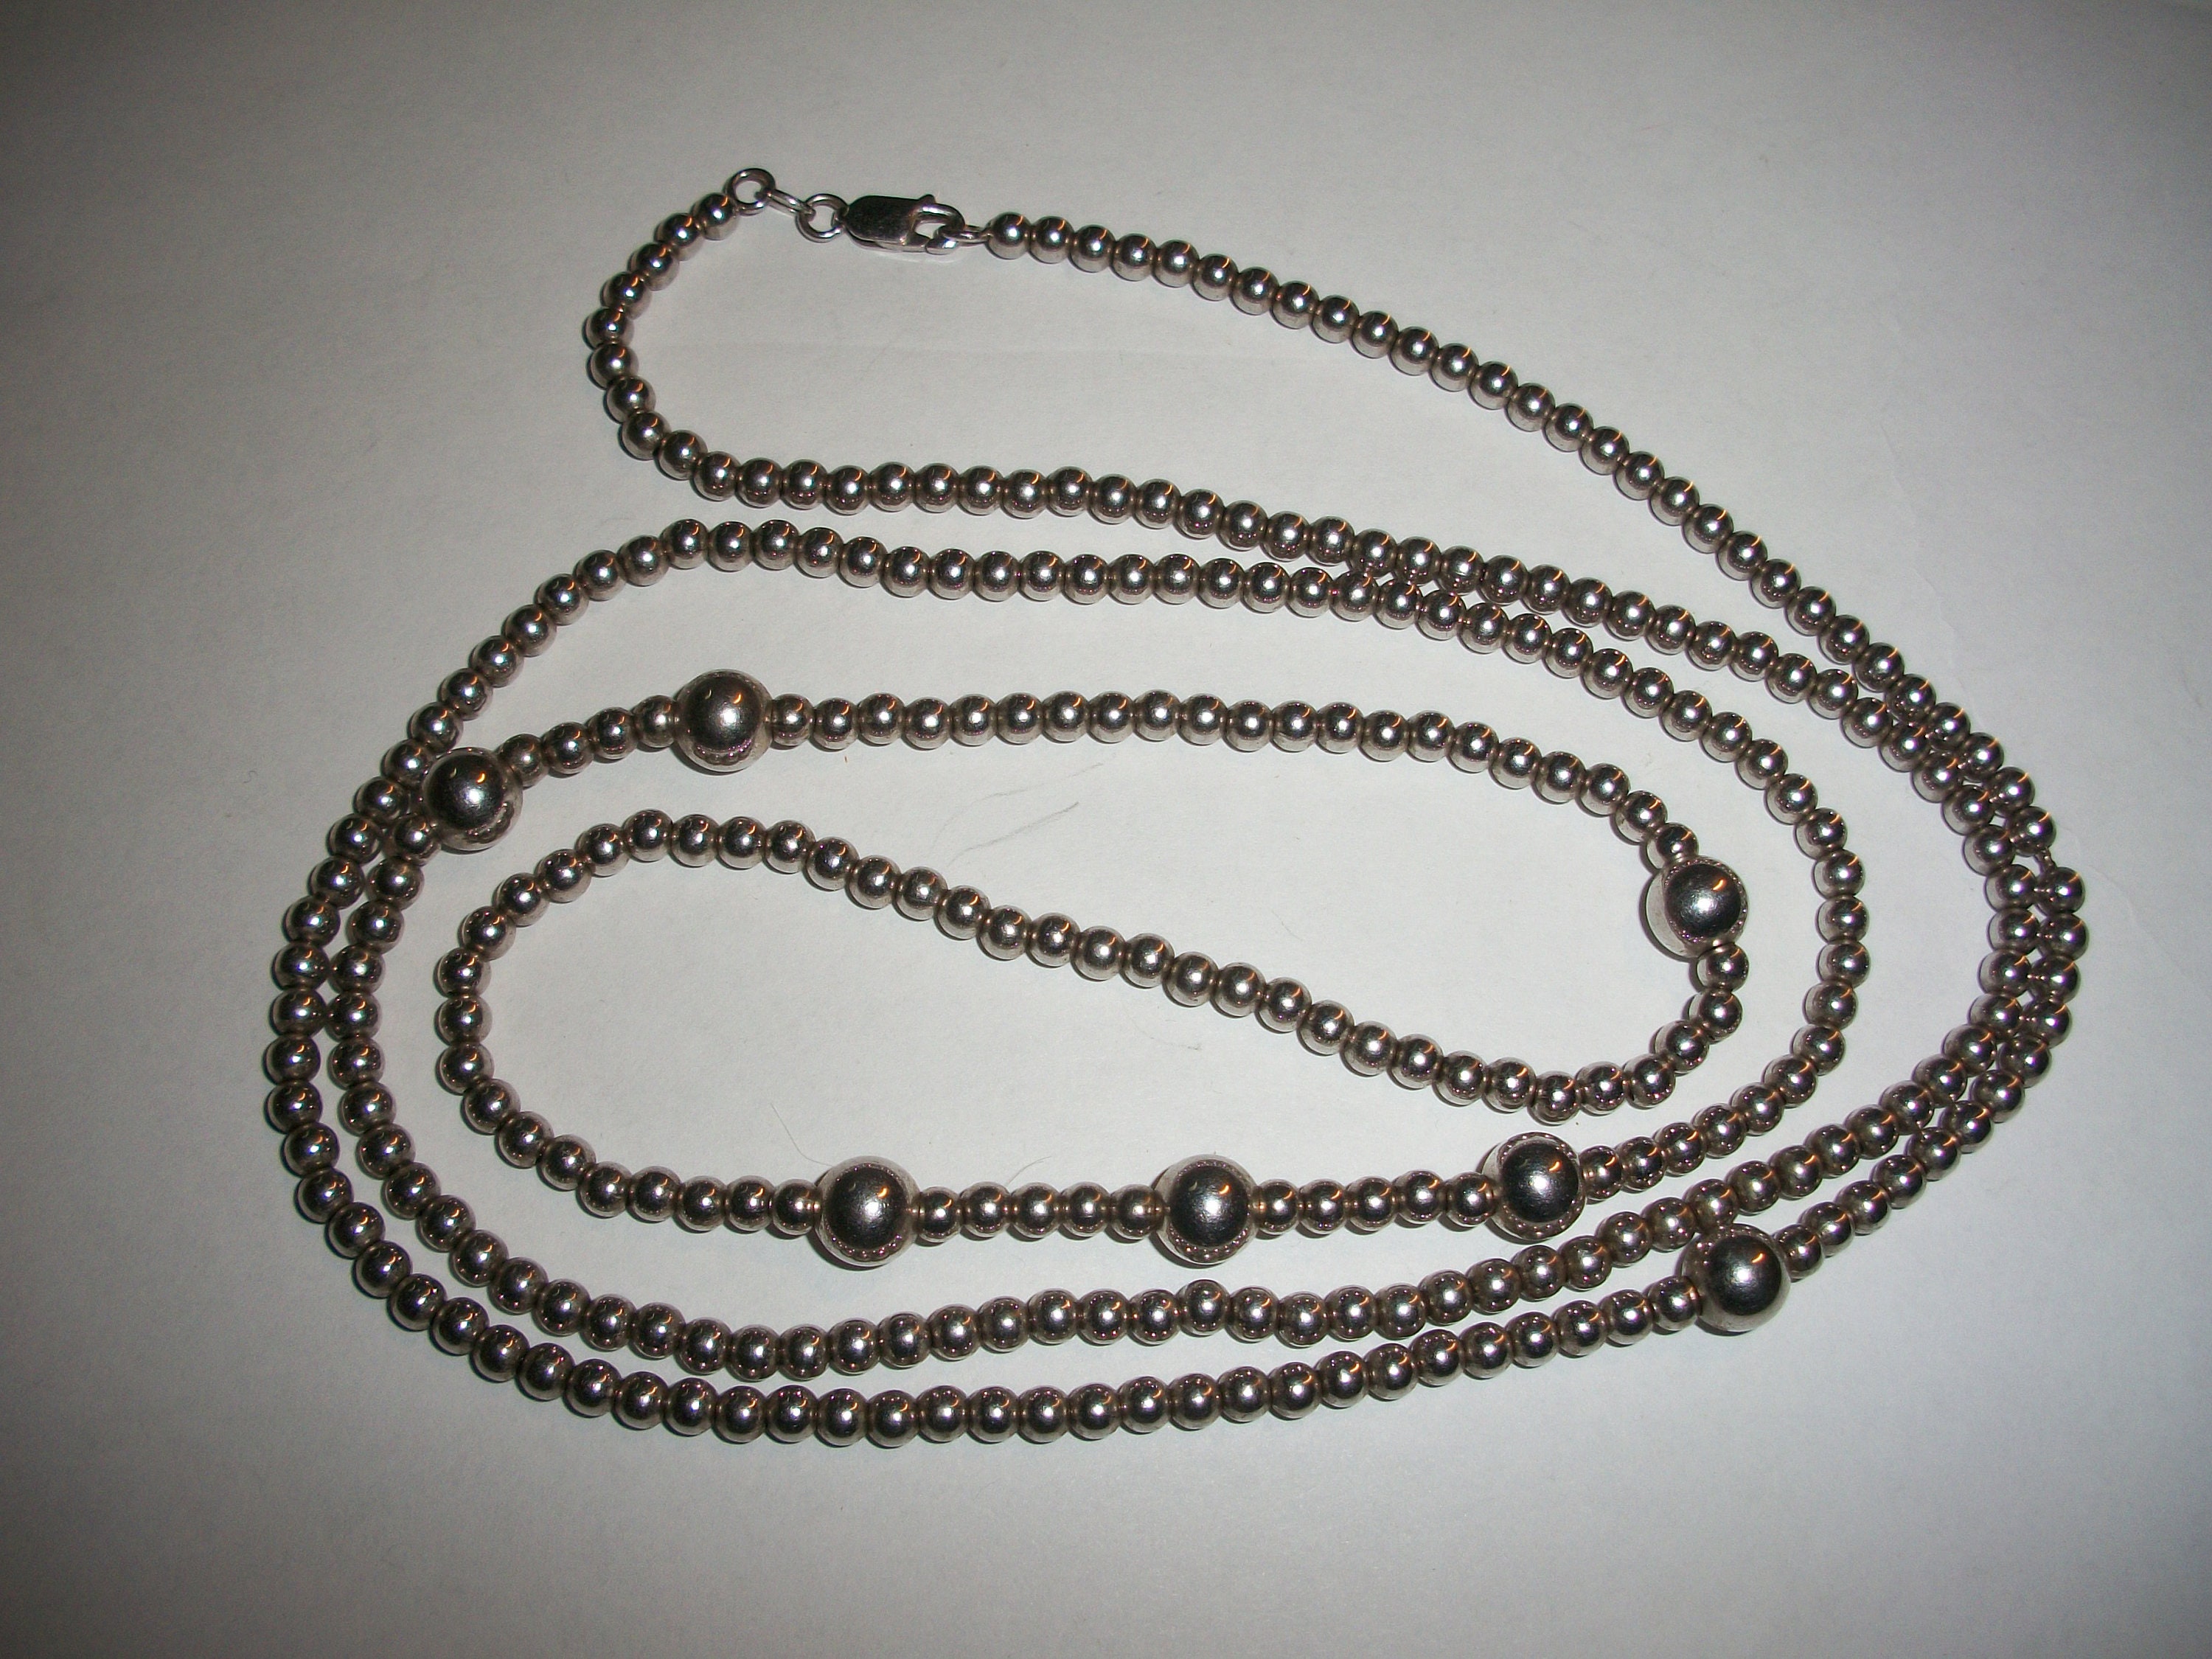 ROPE CHAIN NECKLACE 925 STERLING SILVER SHORT, THICK, WELL MADE ITALY | eBay